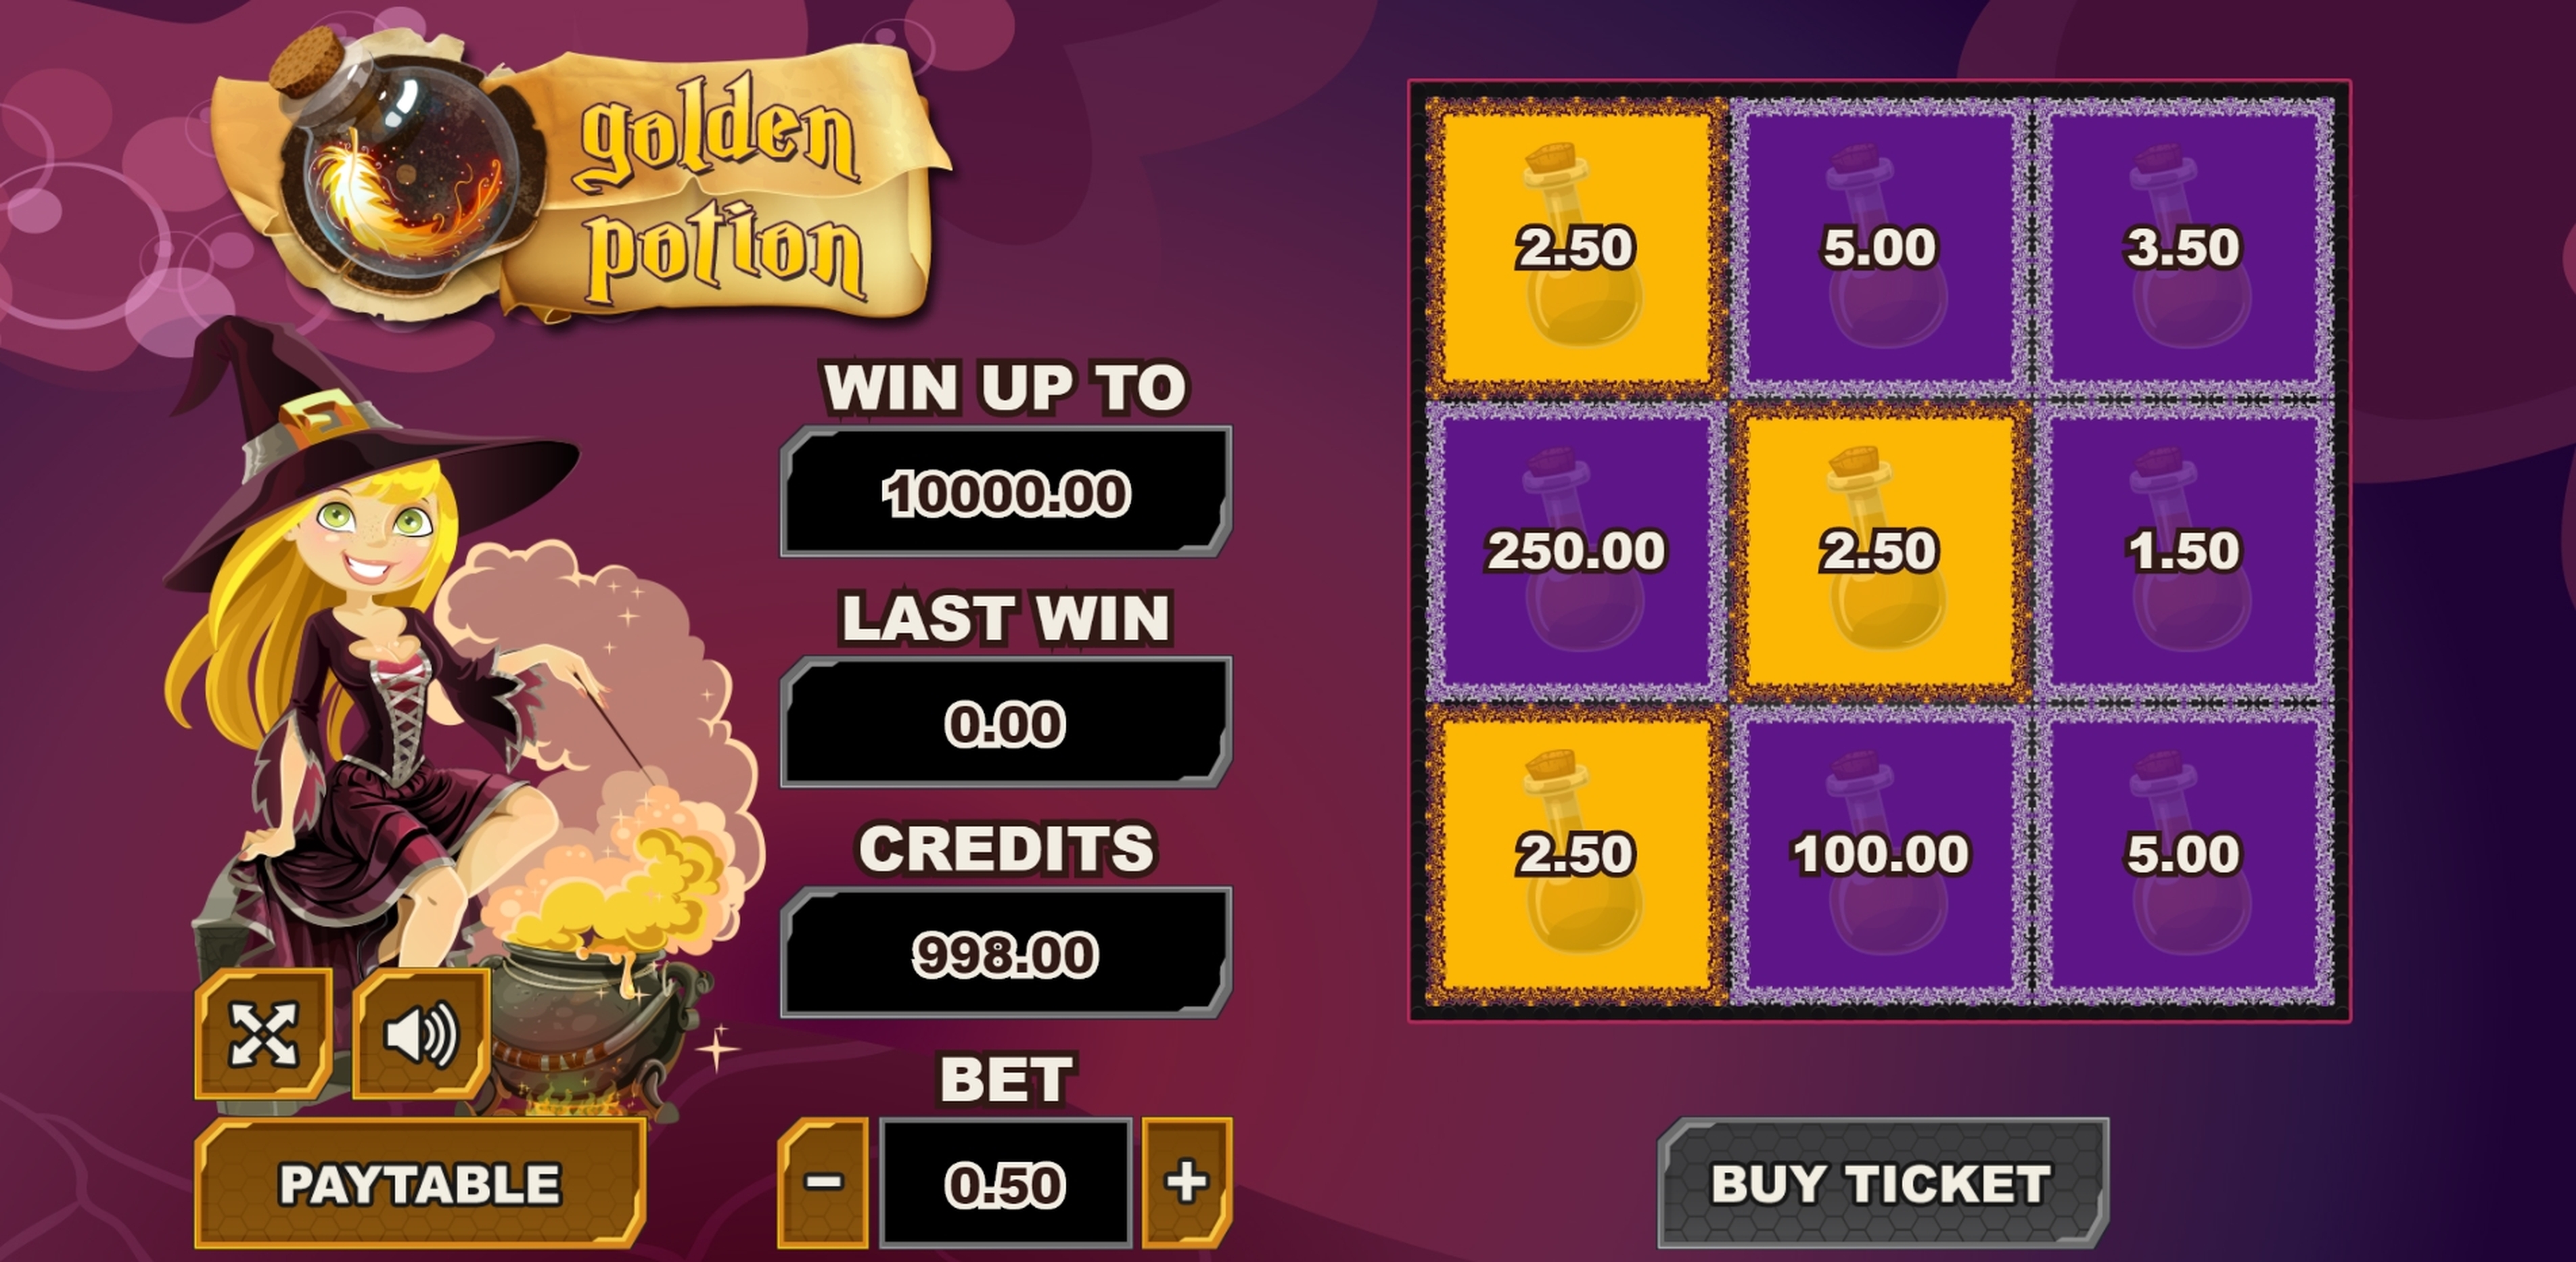 Win Money in Golden Potion Free Slot Game by PlayPearls